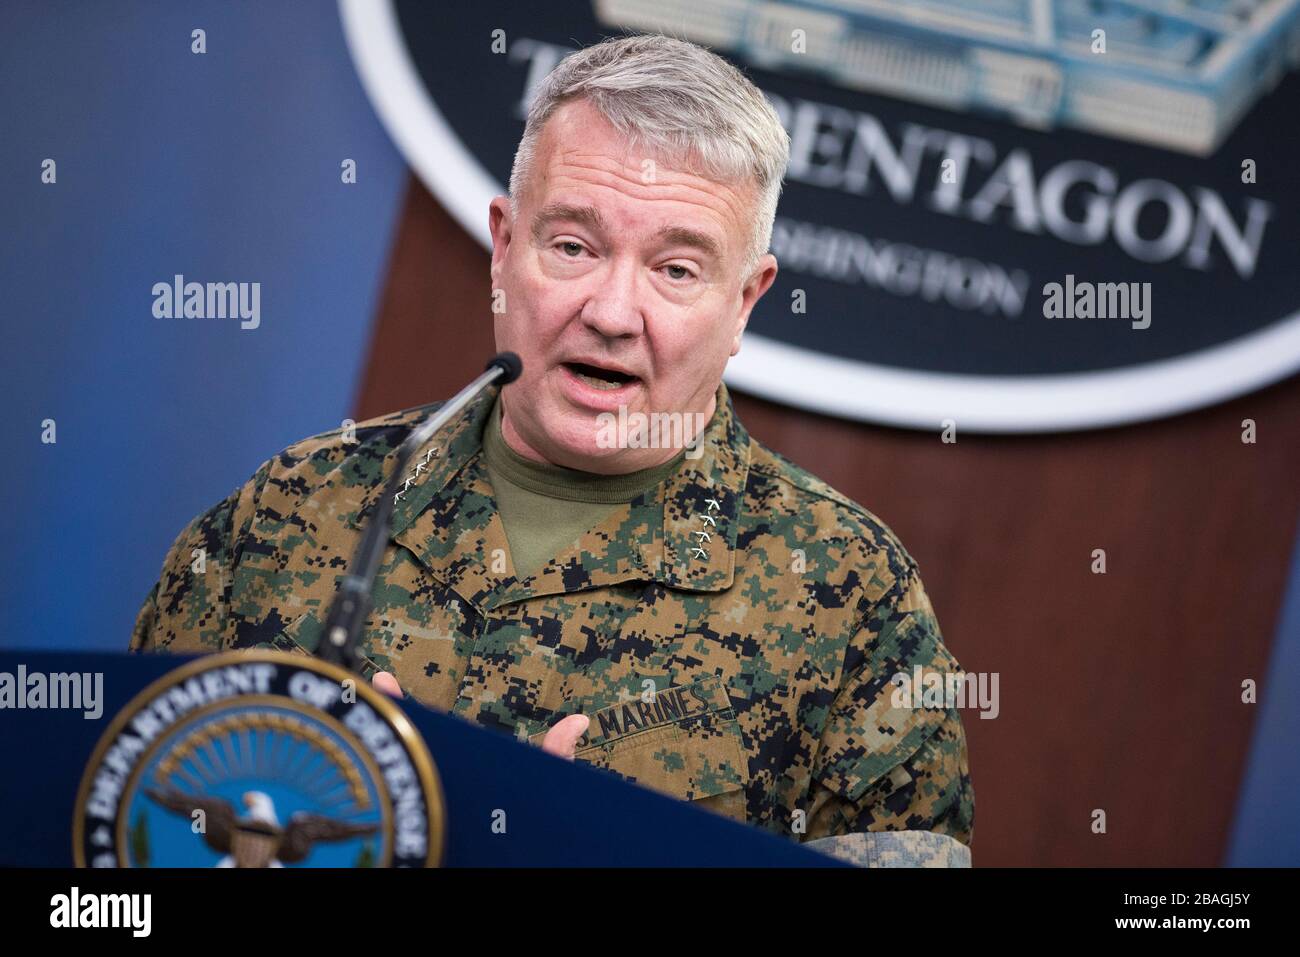 The commander of U.S. Central Command, Marine Corps Gen. Kenneth F. McKenzie Jr., briefs reporters on the status of operations in the CENTCOM area of responsibility and the COVID-19 pandemic at the Pentagon March 13, 2020 in Arlington, Virginia. Stock Photo